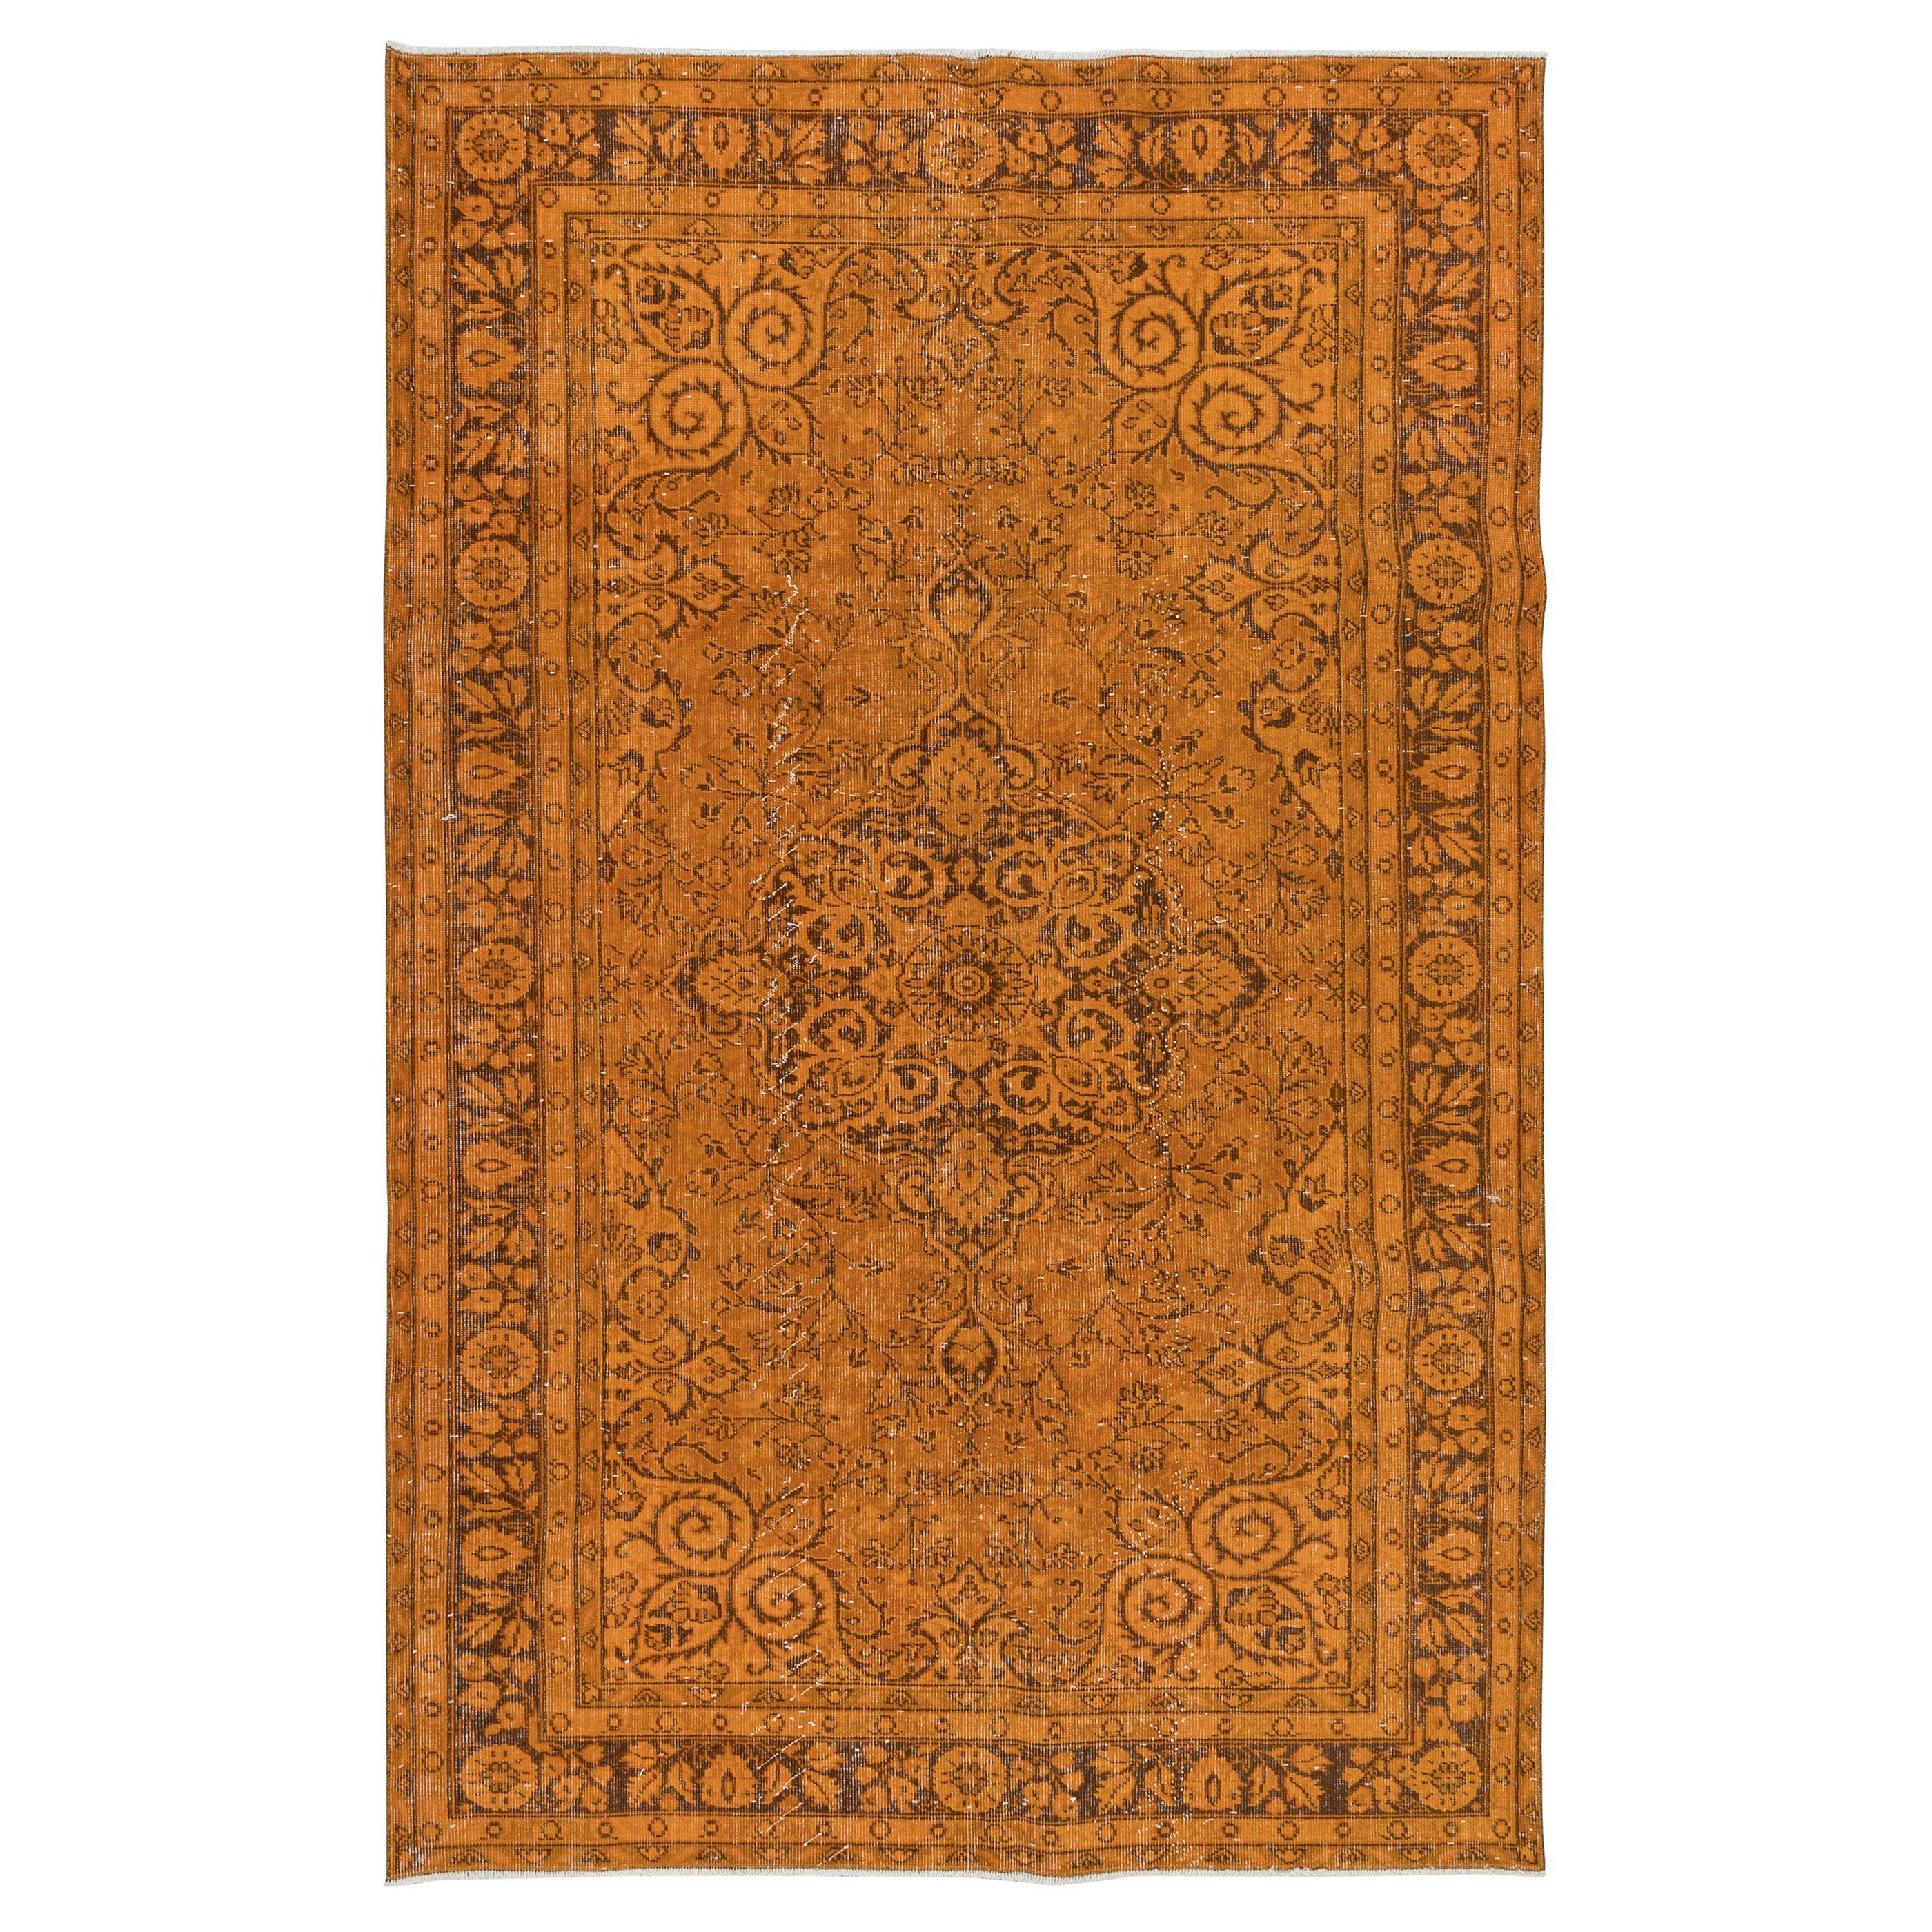 5.7x9 Ft Hand-Made Central Anatolian Area Rug in Orange, Modern Wool Carpet For Sale